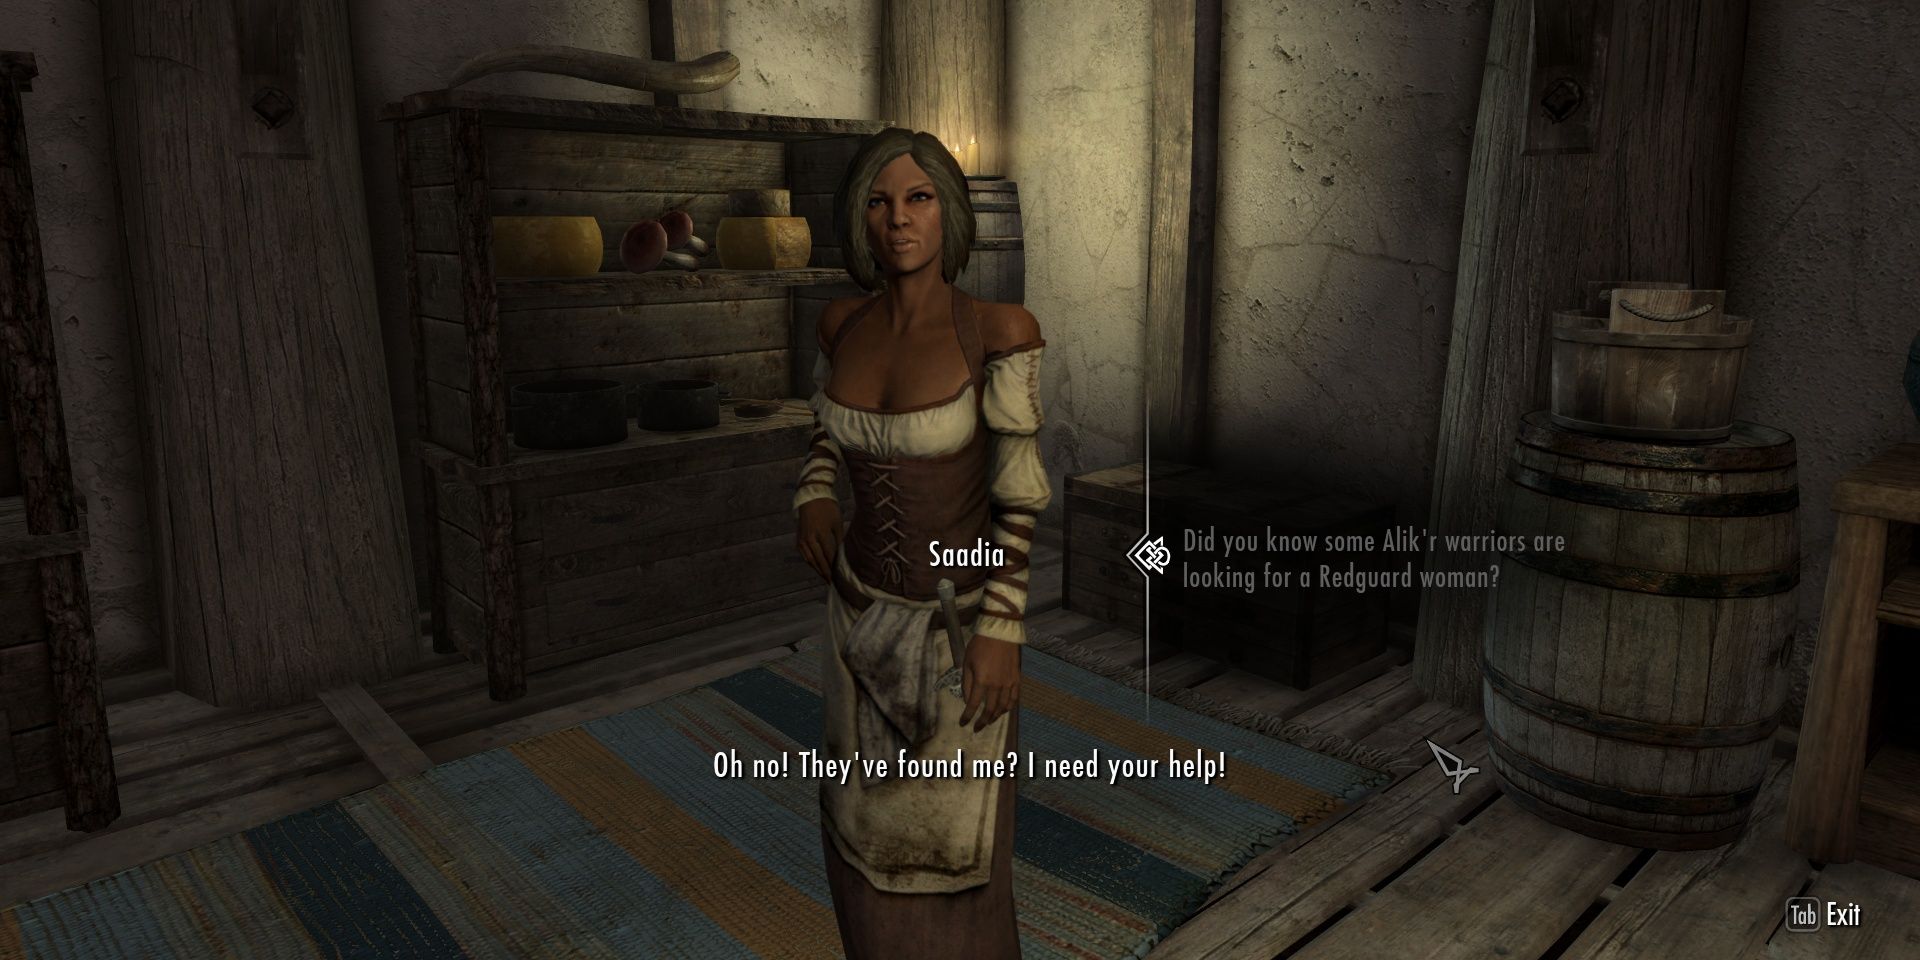 https://www.reddit.com/r/skyrim/comments/7dnsik/redguard_woman_quest_who_is_lying/